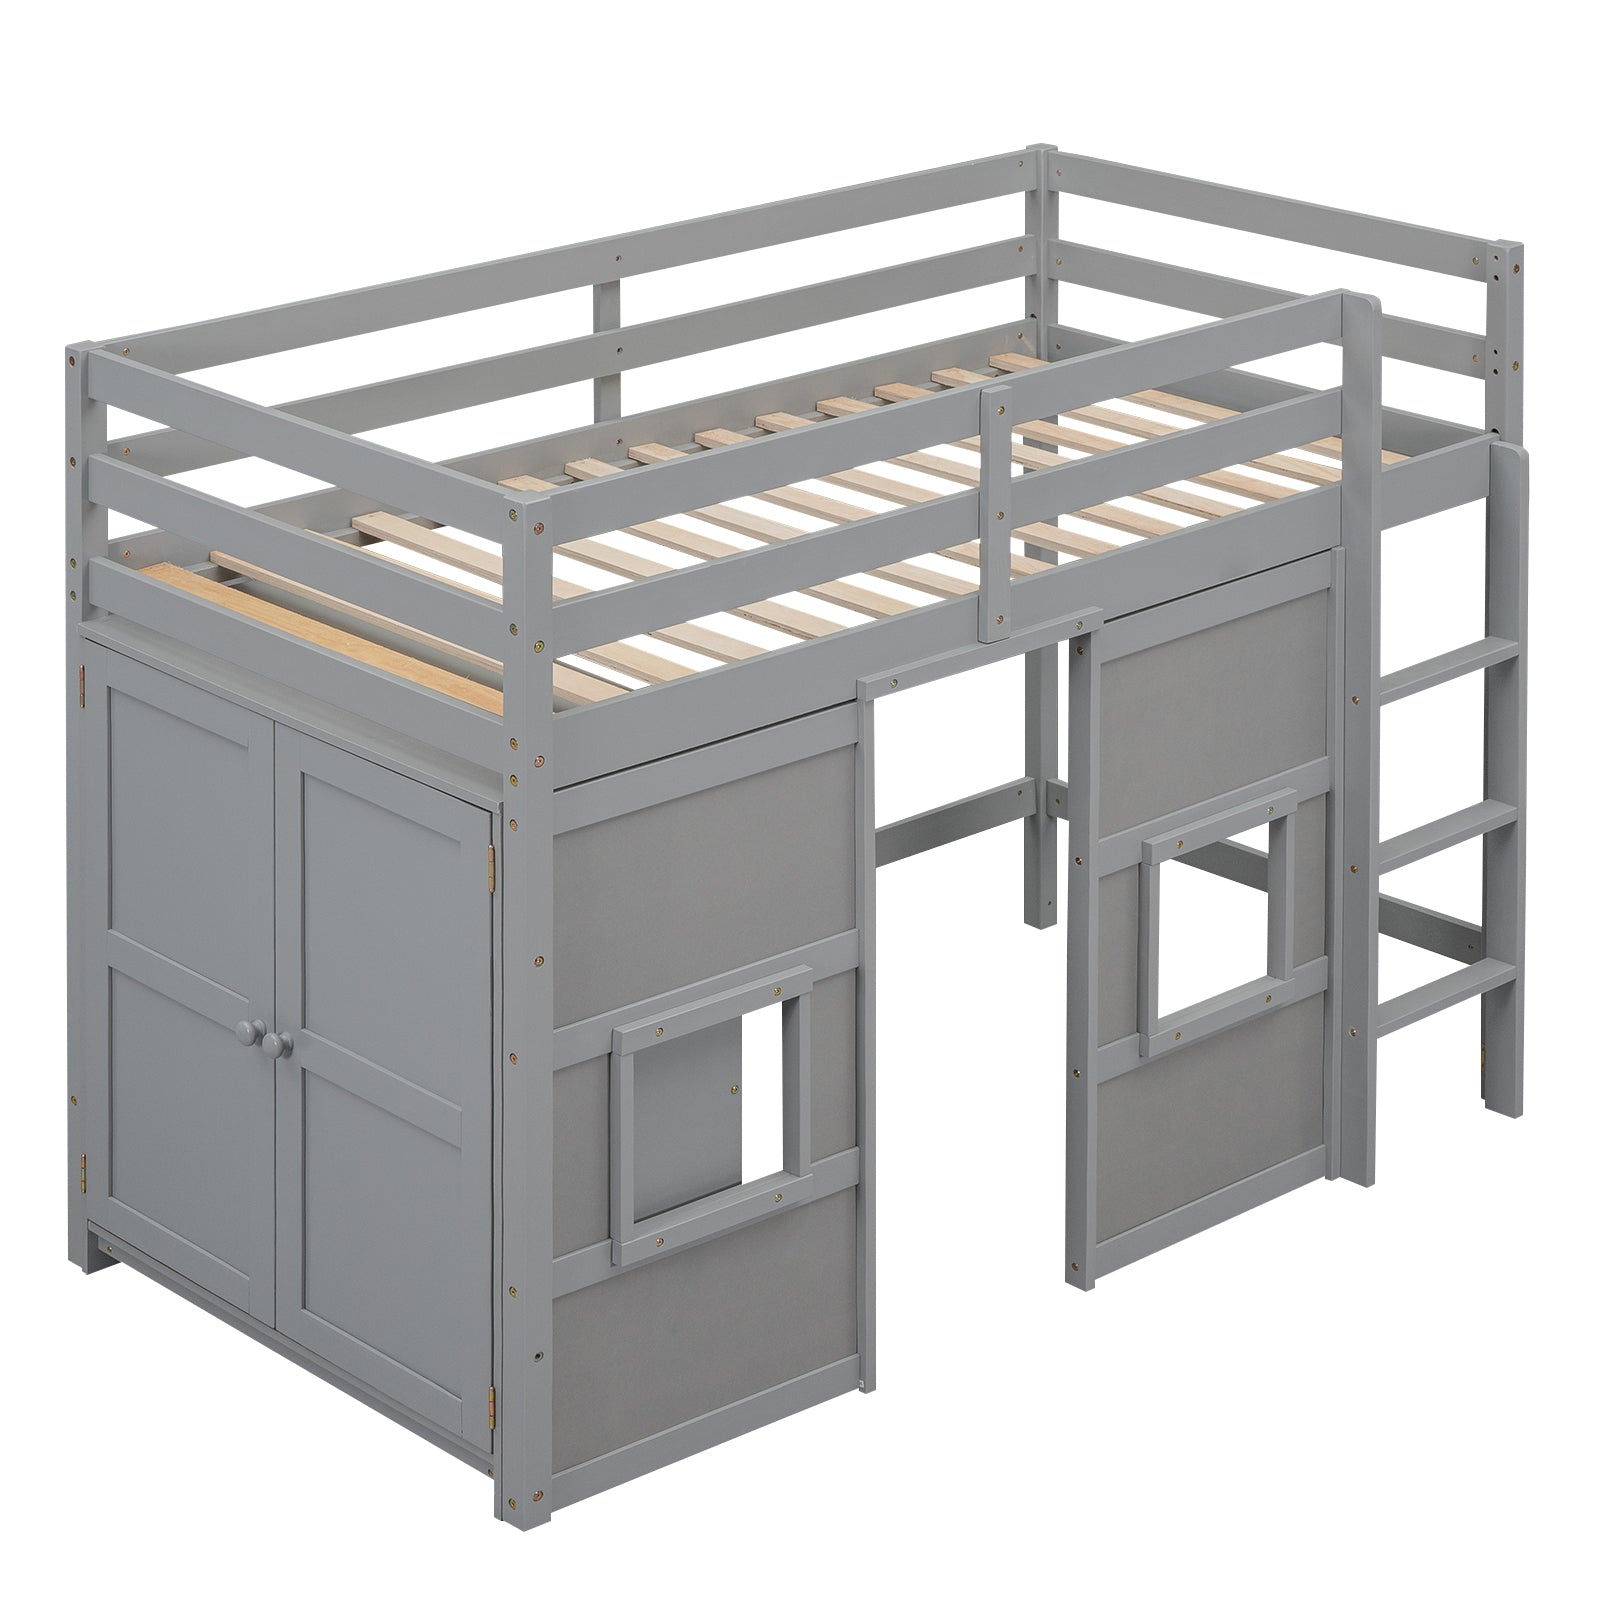 Wood Twin Size Loft Bed with Built-in Storage Wardrobe and 2 Windows, Gray(Expected Arrival Time: 12.28)